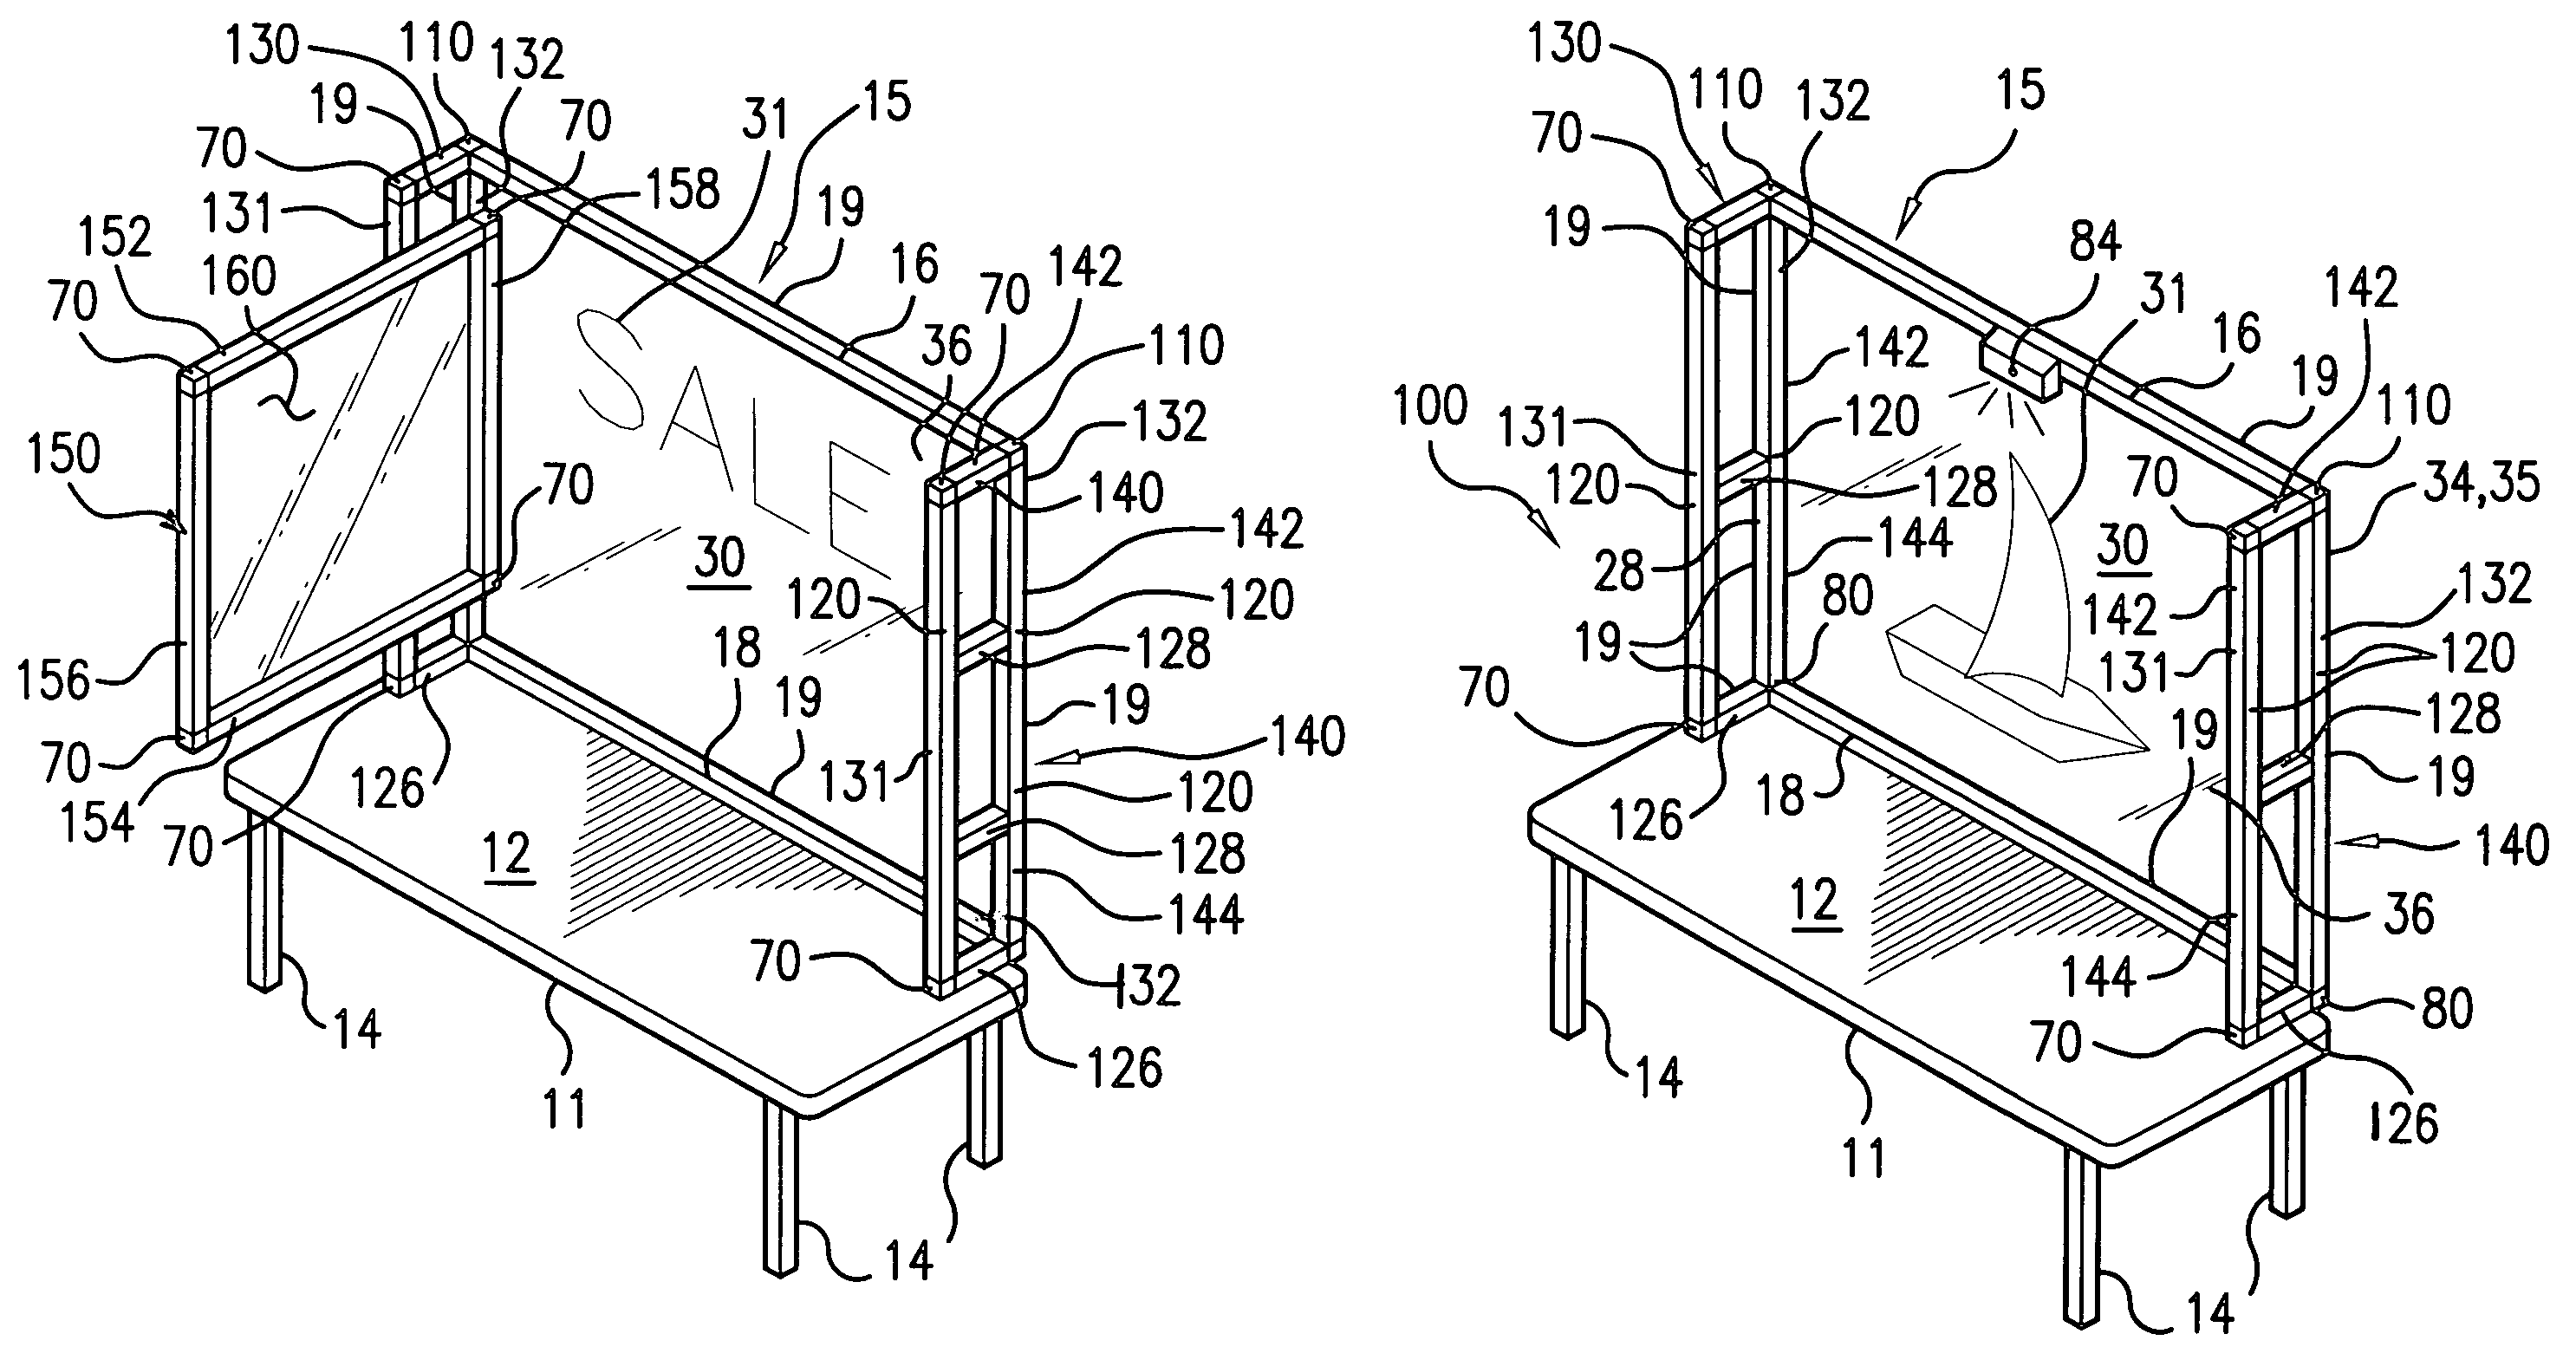 Double sided table top display apparatus